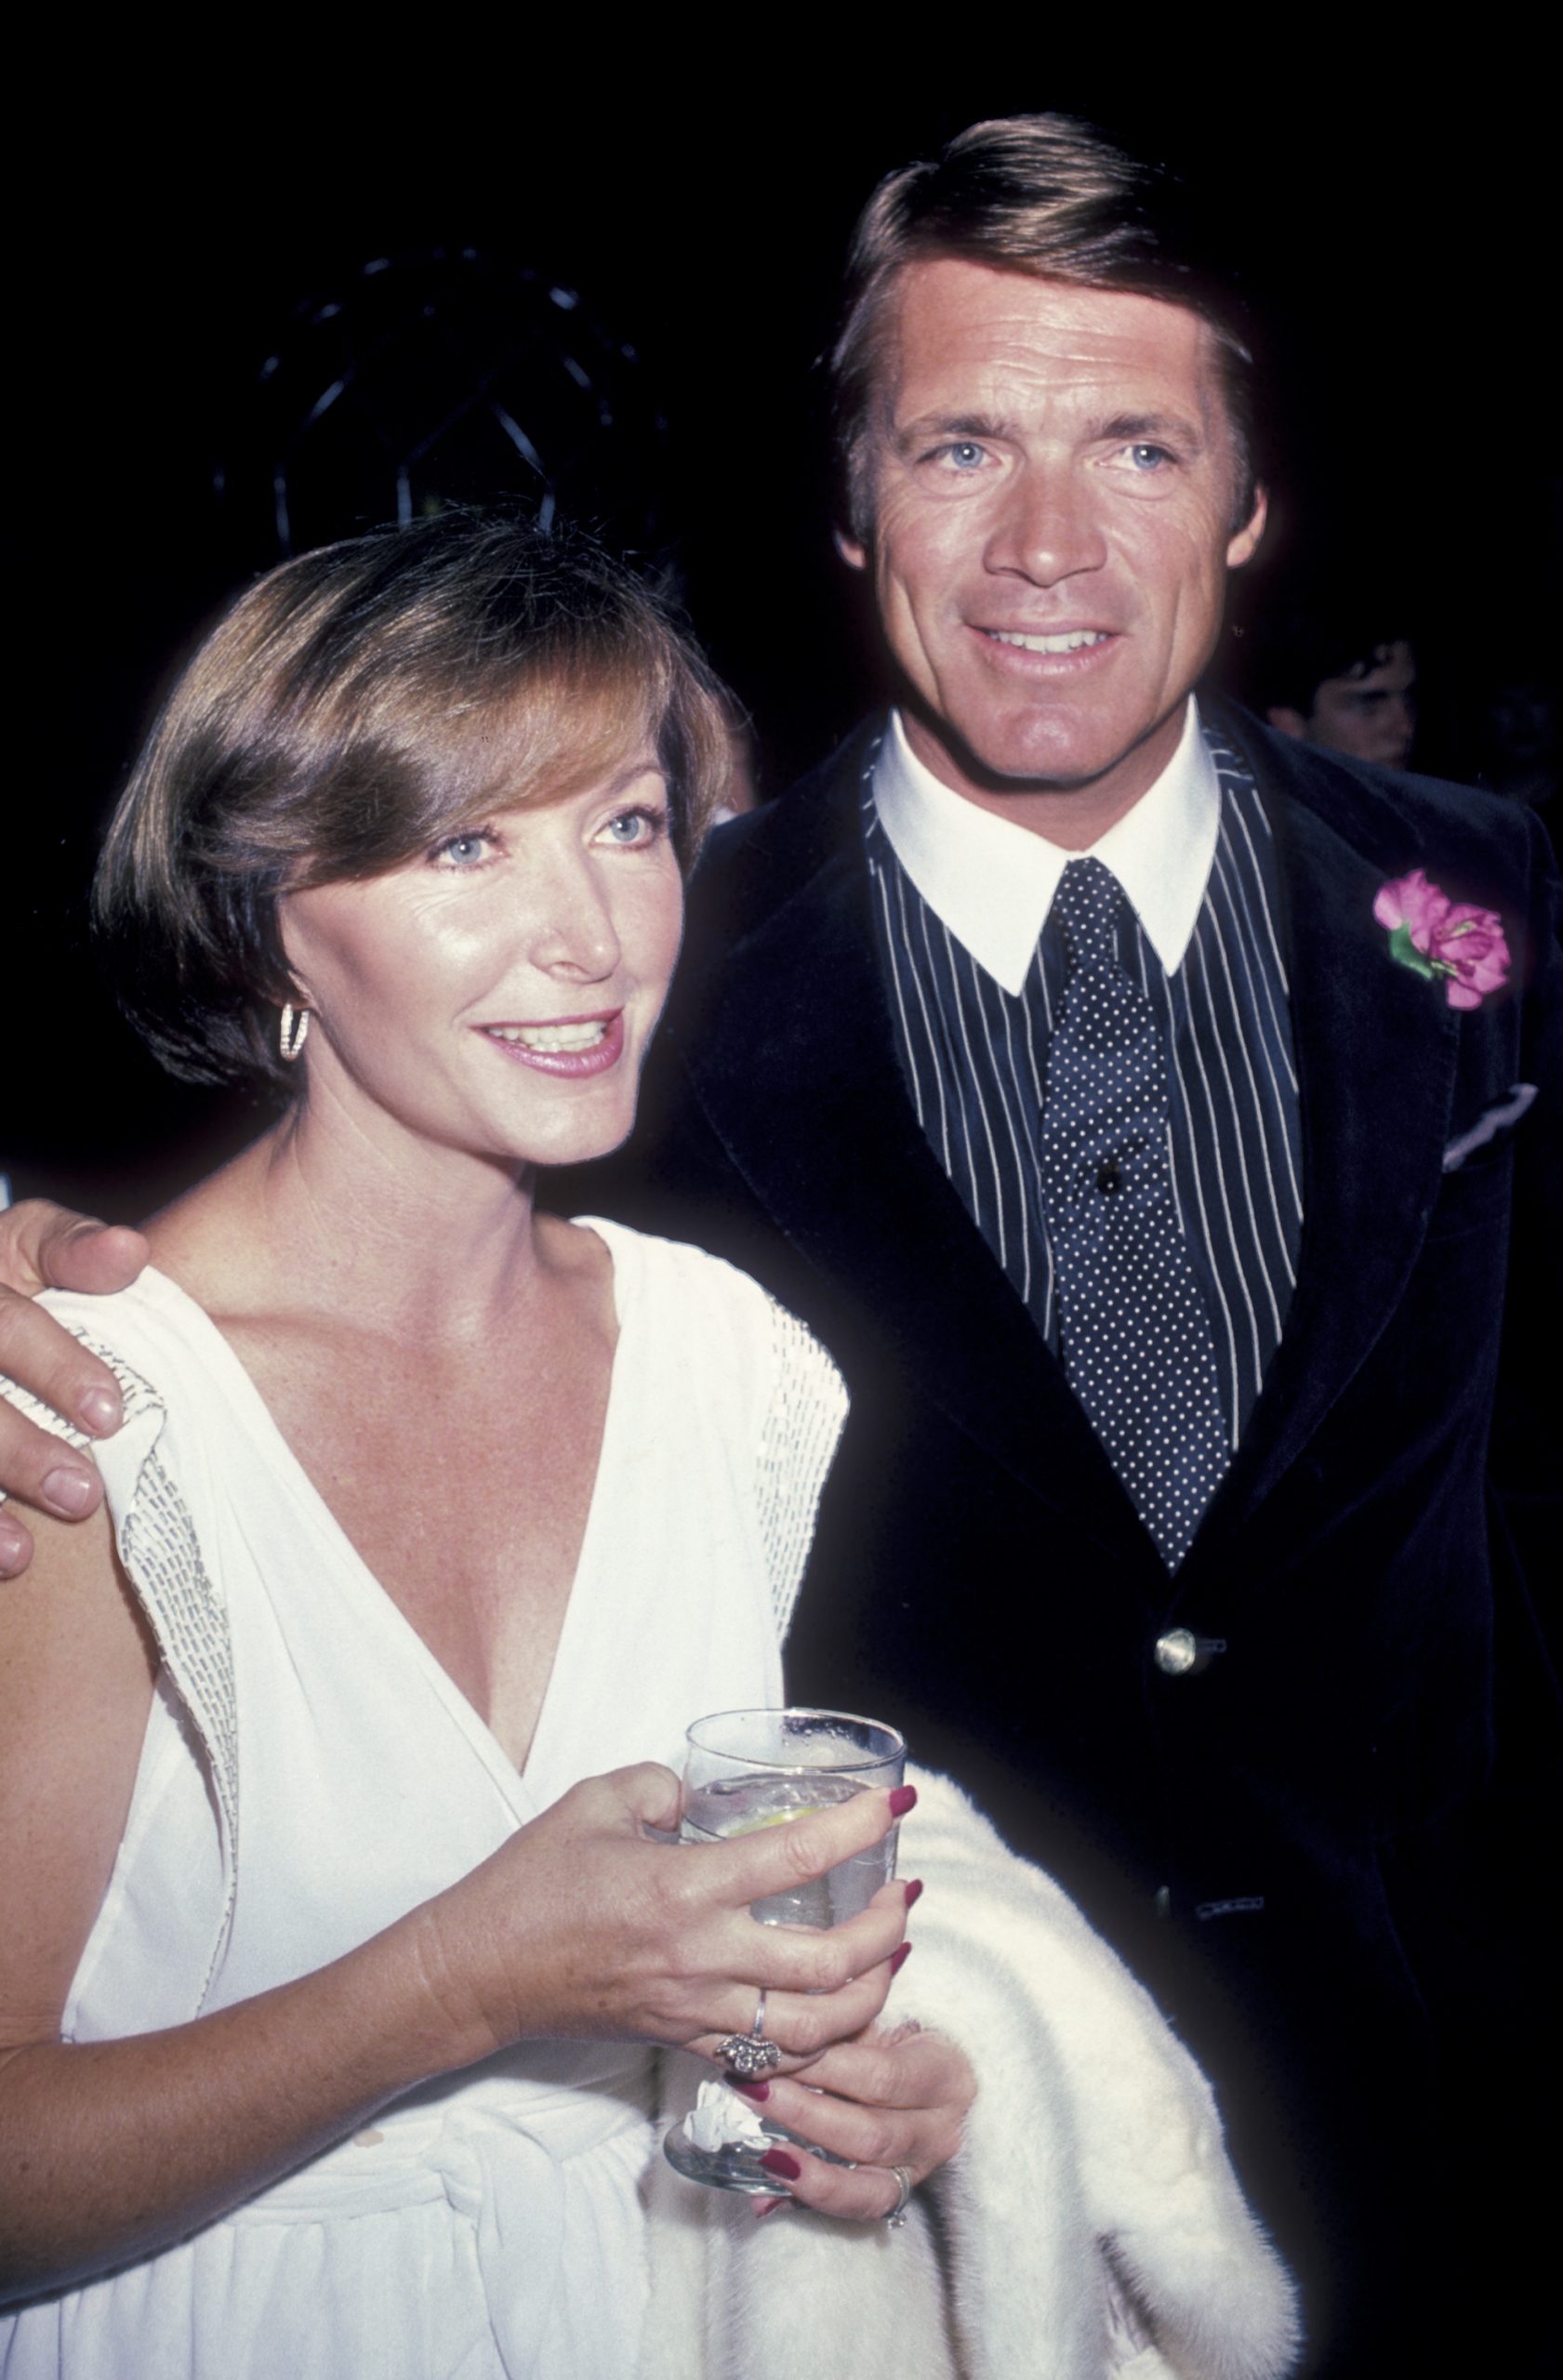 Looking Back At Chad Everett And Shelby Grant's 40+ Years Of Marriage